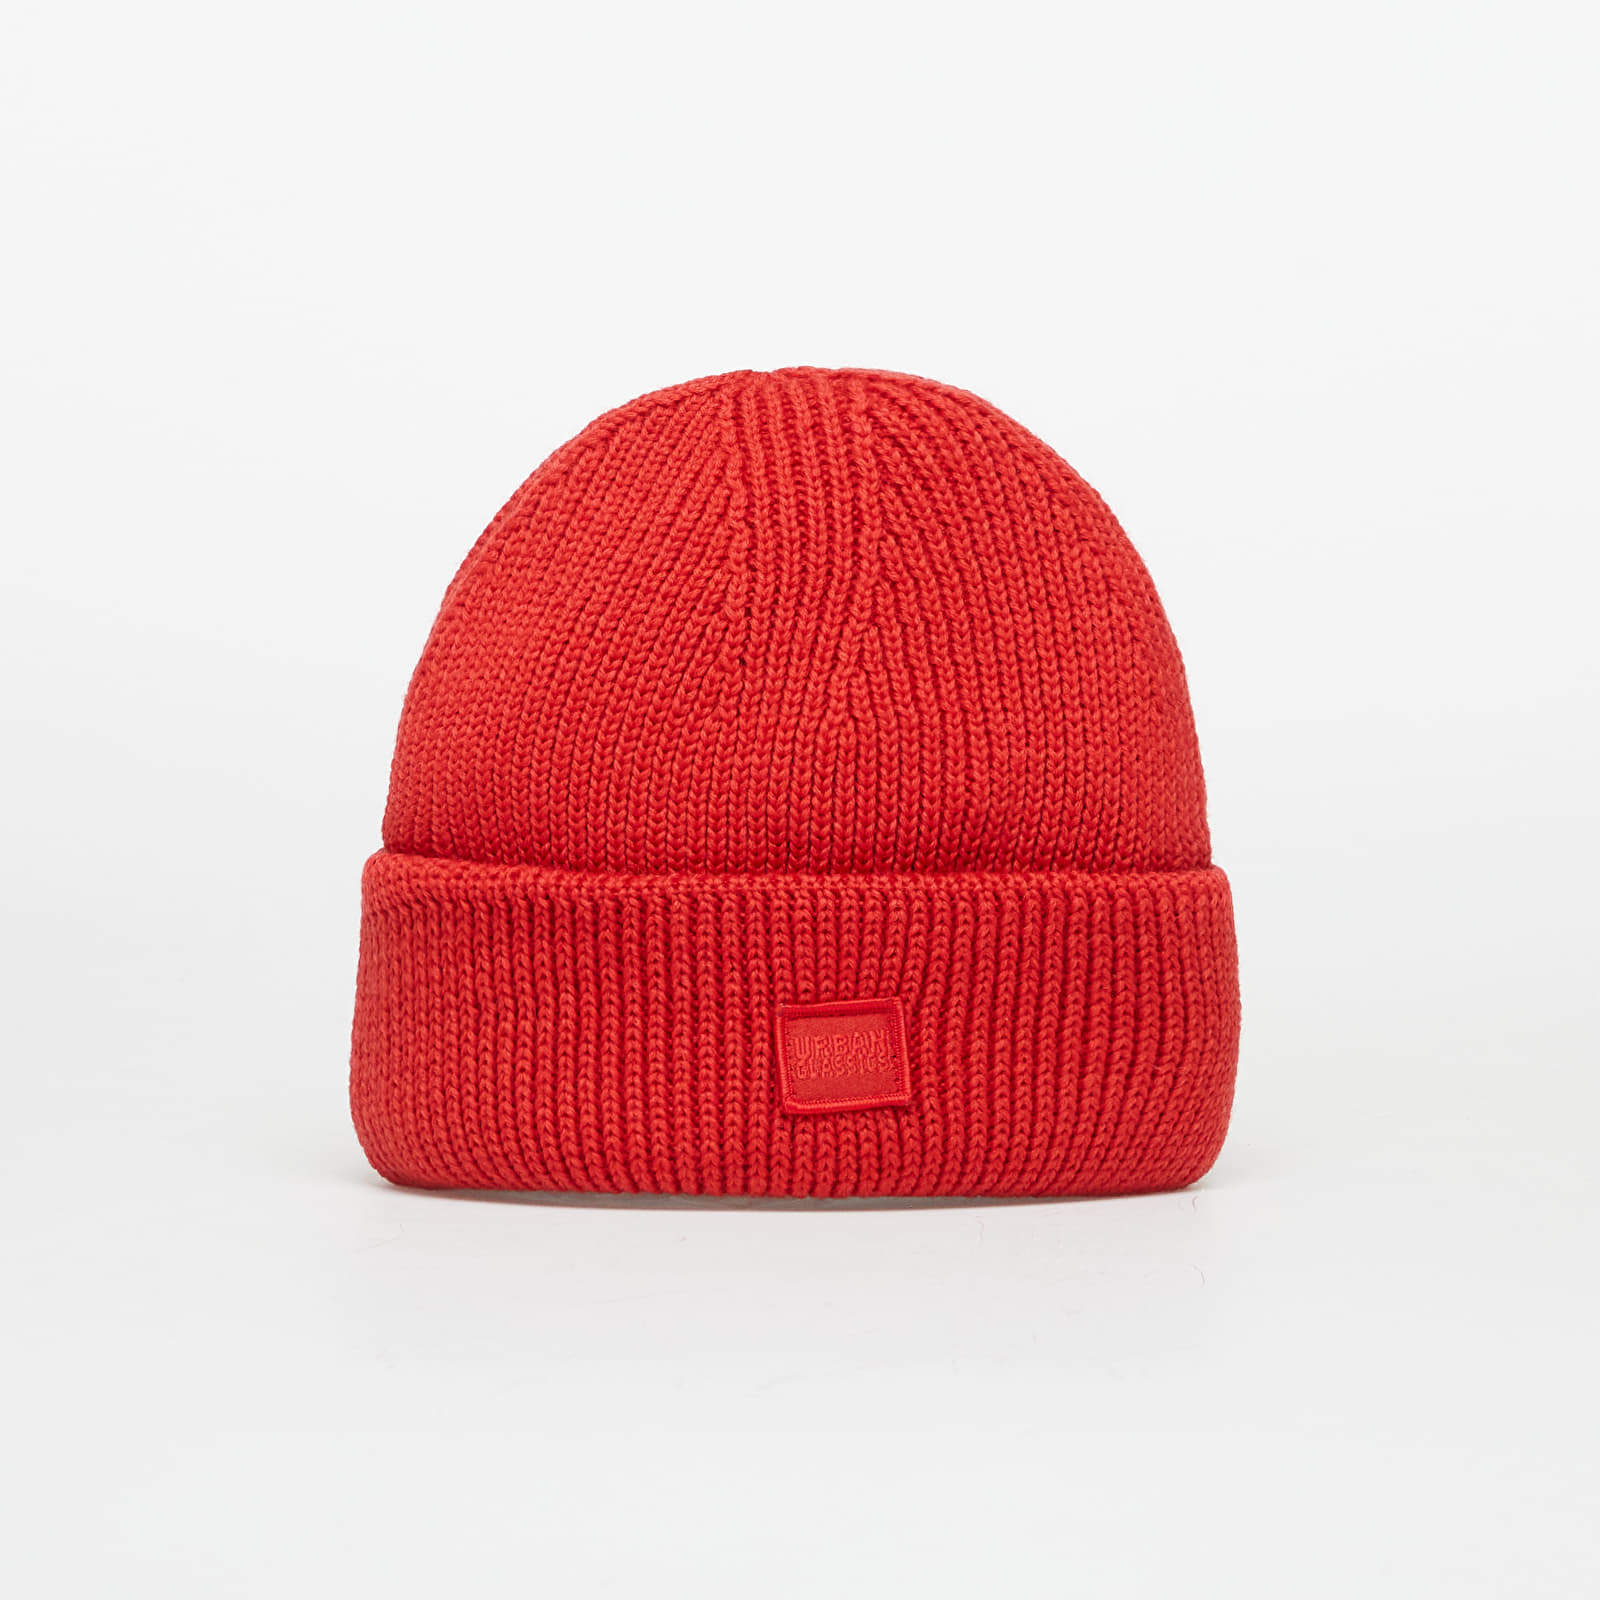 Wool Urban Red Knitted Hats Classics Huge Queens Beanie |